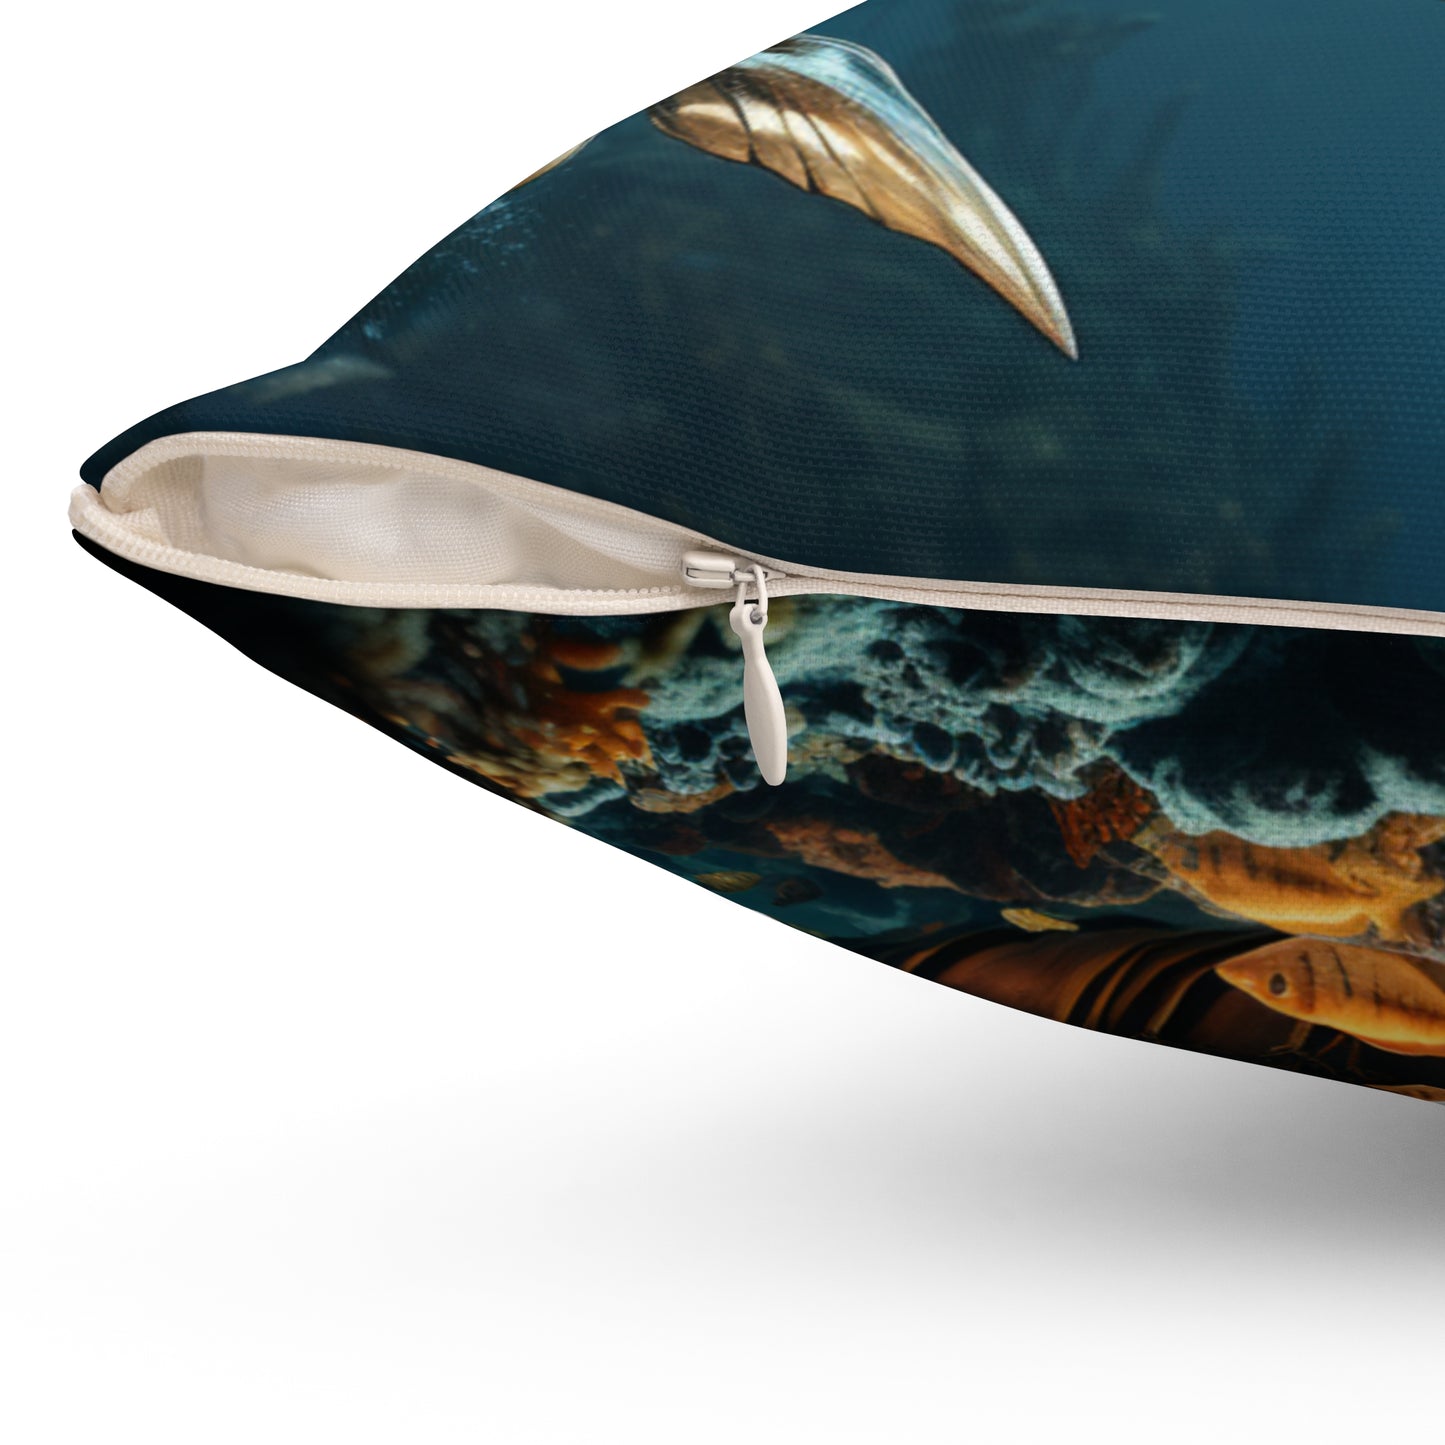 Steampunk Dolphin and Submarine Pillow